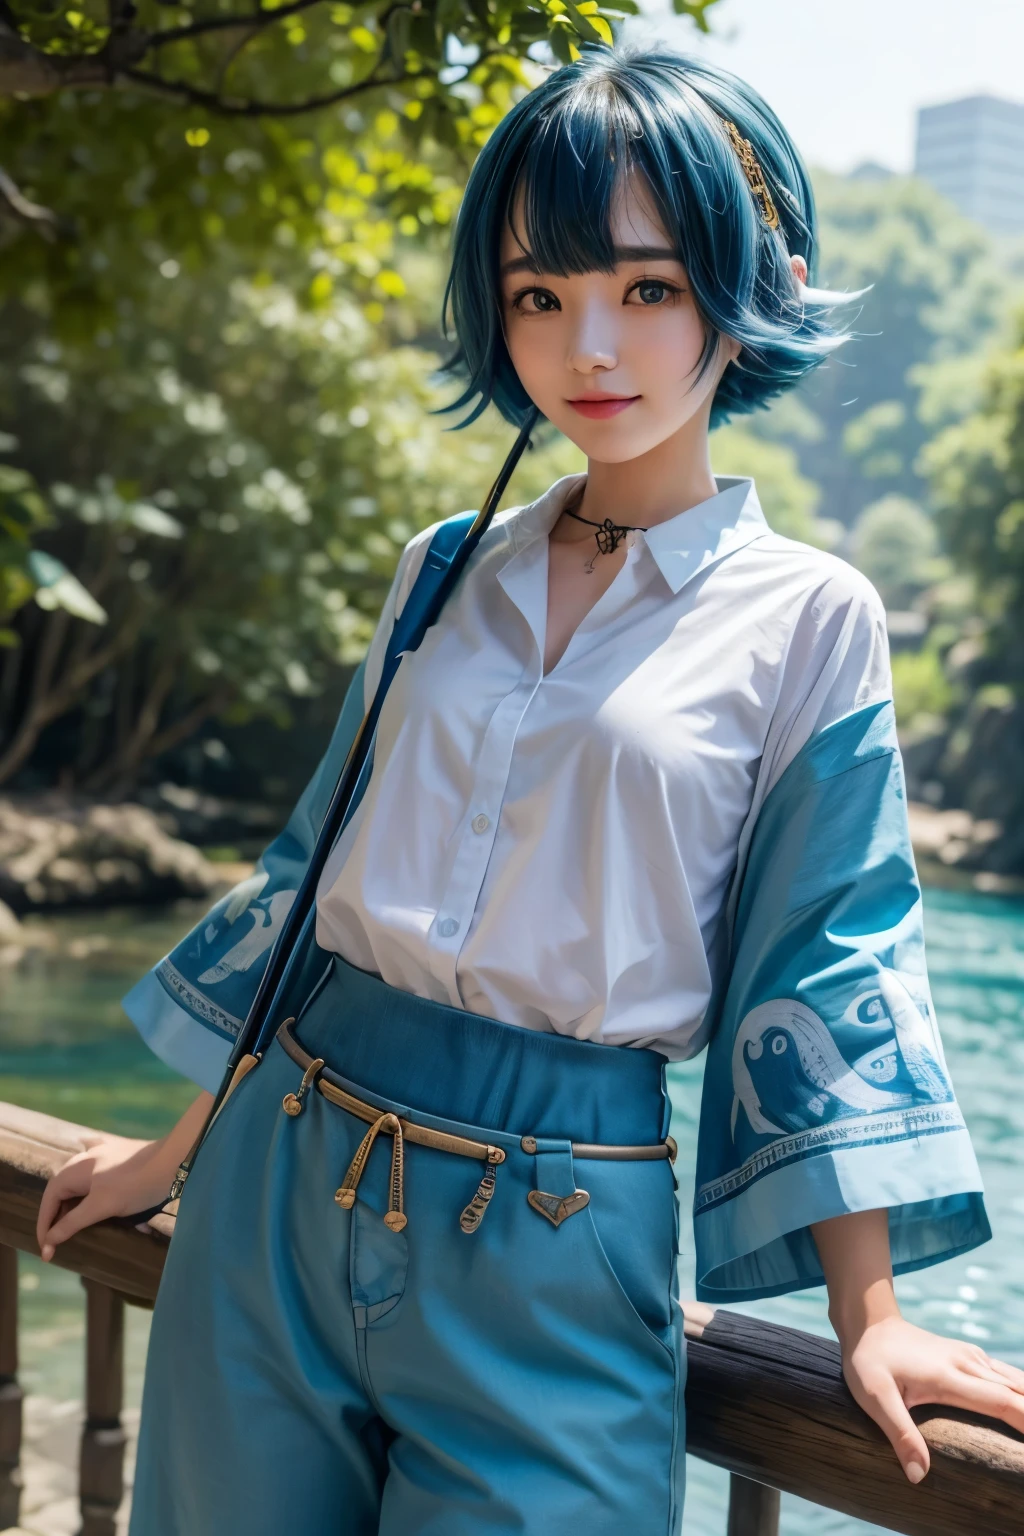 highest quality、4k、masterpiece、highly detailed eyes、super detailed、1 girl、solo、water lily、Pokémon、Pokemon、very delicate、8k、smile、whole body、blue hair、perfect human structure、Gold hair fastening at bangs,blue pants、blue collar white shirt、beautiful girl,fishing rod、dynamic pose、blue hair short hair、delicate hair、The background is a forest with a river、She wears a large golden checkered hair ornament on her bangs.、The collar of the shirt is blue、big hair ornament